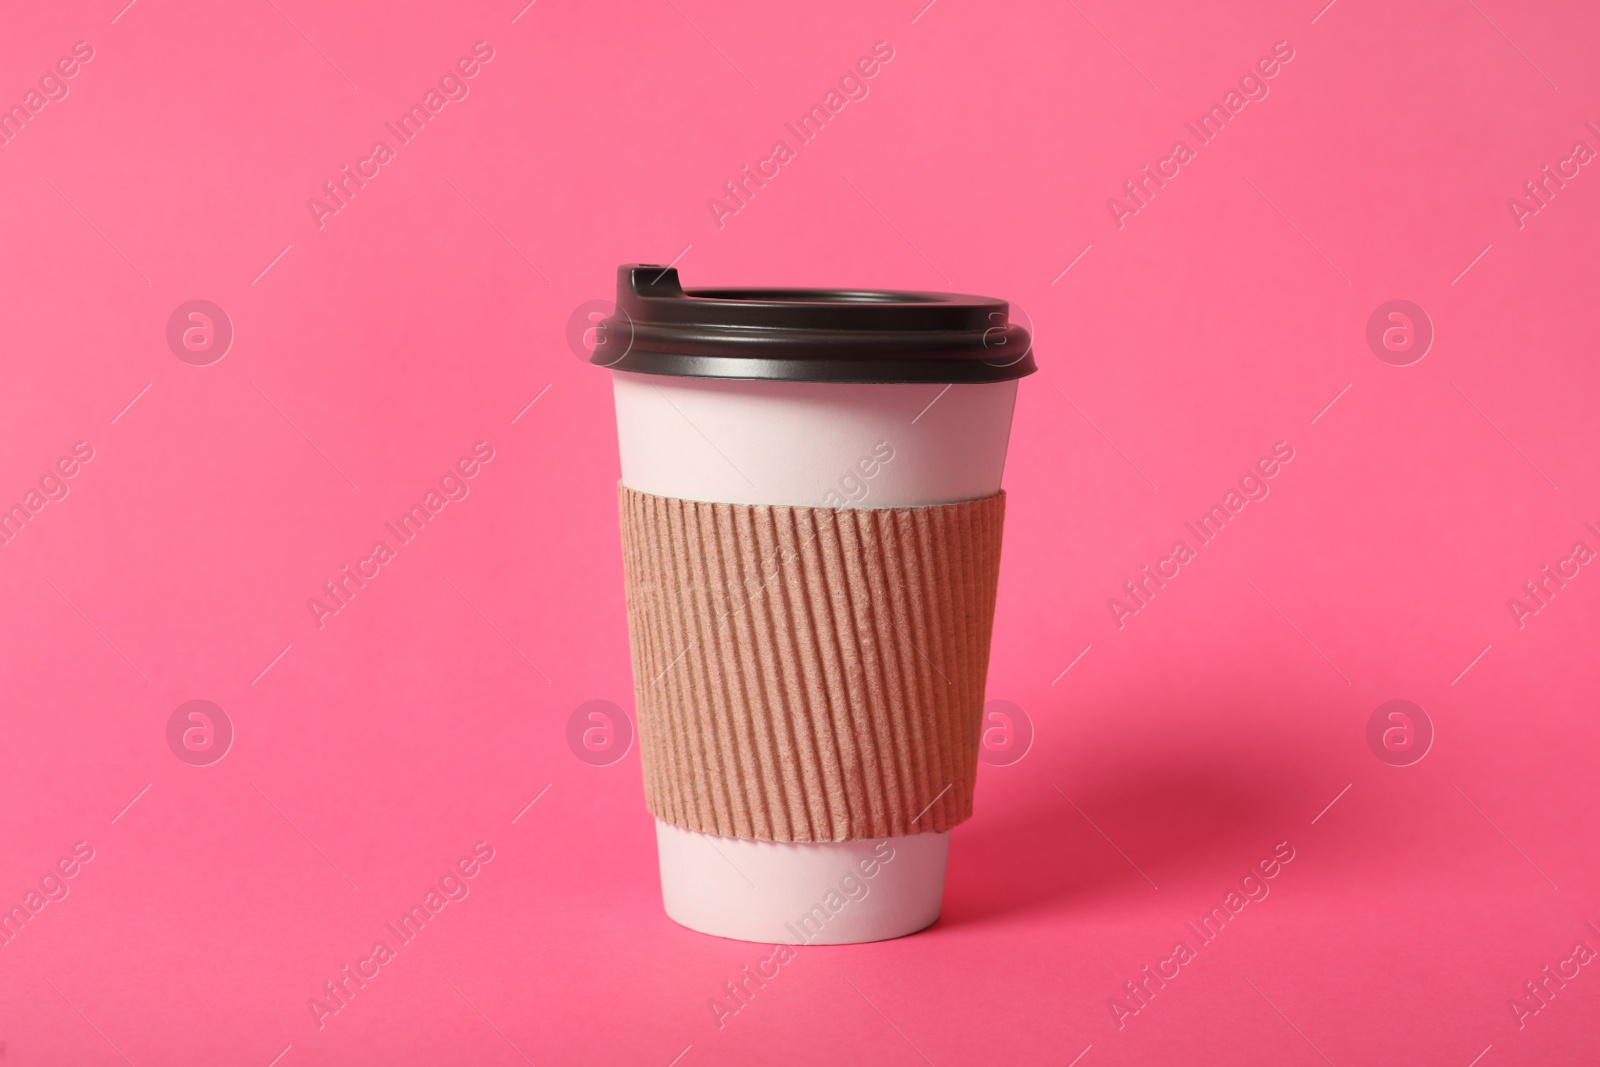 Photo of Takeaway paper coffee cup with cardboard sleeve on pink background